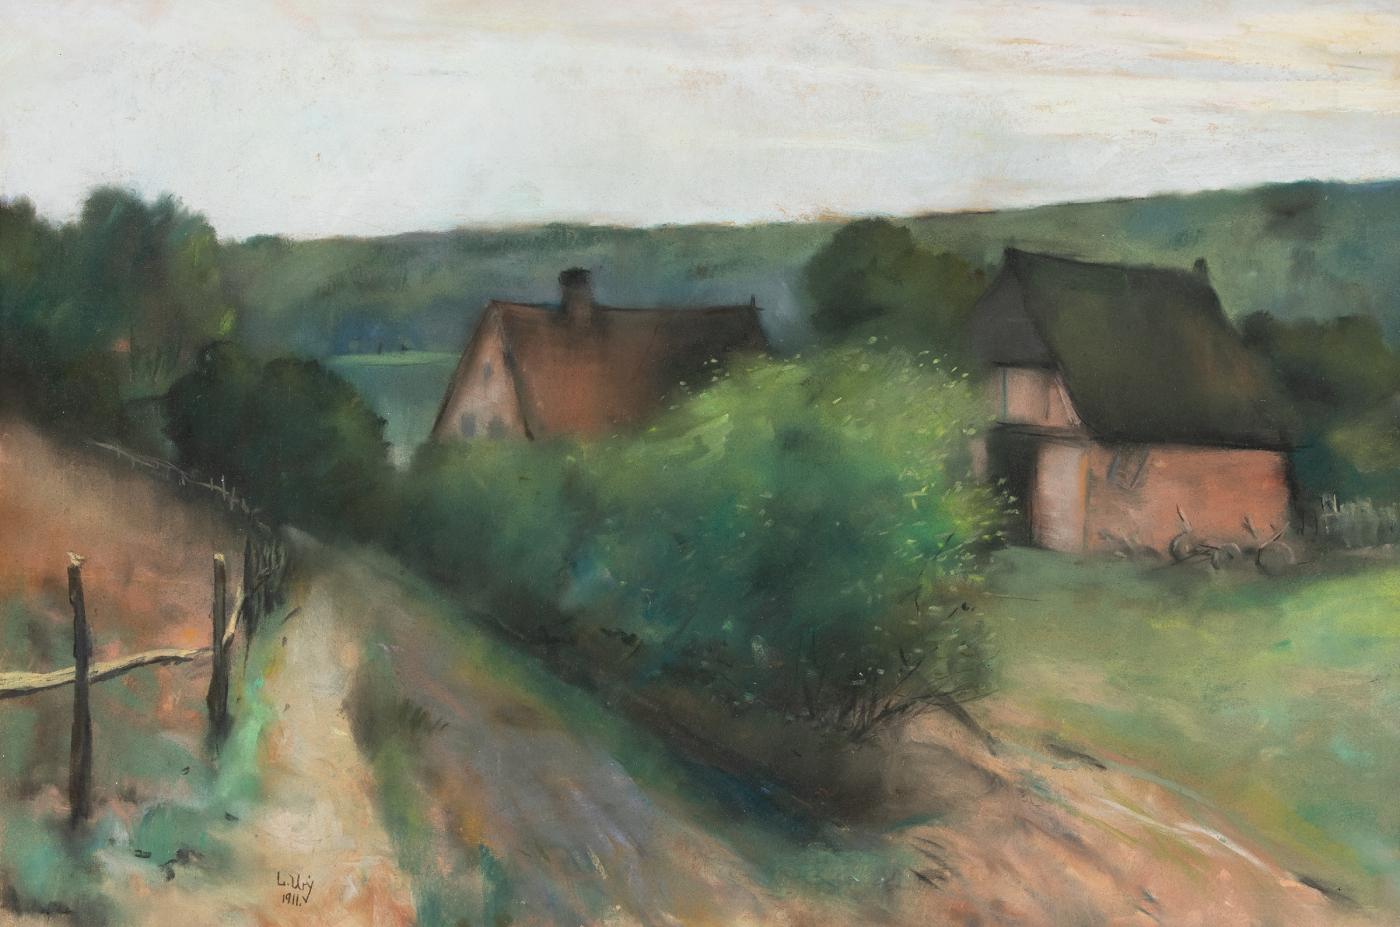 *PLEASE NOTE UK BUYERS WILL ONLY PAY 5% VAT ON THIS PURCHASE.

Landscape by Lesser Ury (1861-1931)
Pastel on paper
50 x 70 cm (19 ³/₄ x 27 ¹/₂ inches)
Signed lower left
Executed in 1911

Provenance: Private collection, Israel

Artist